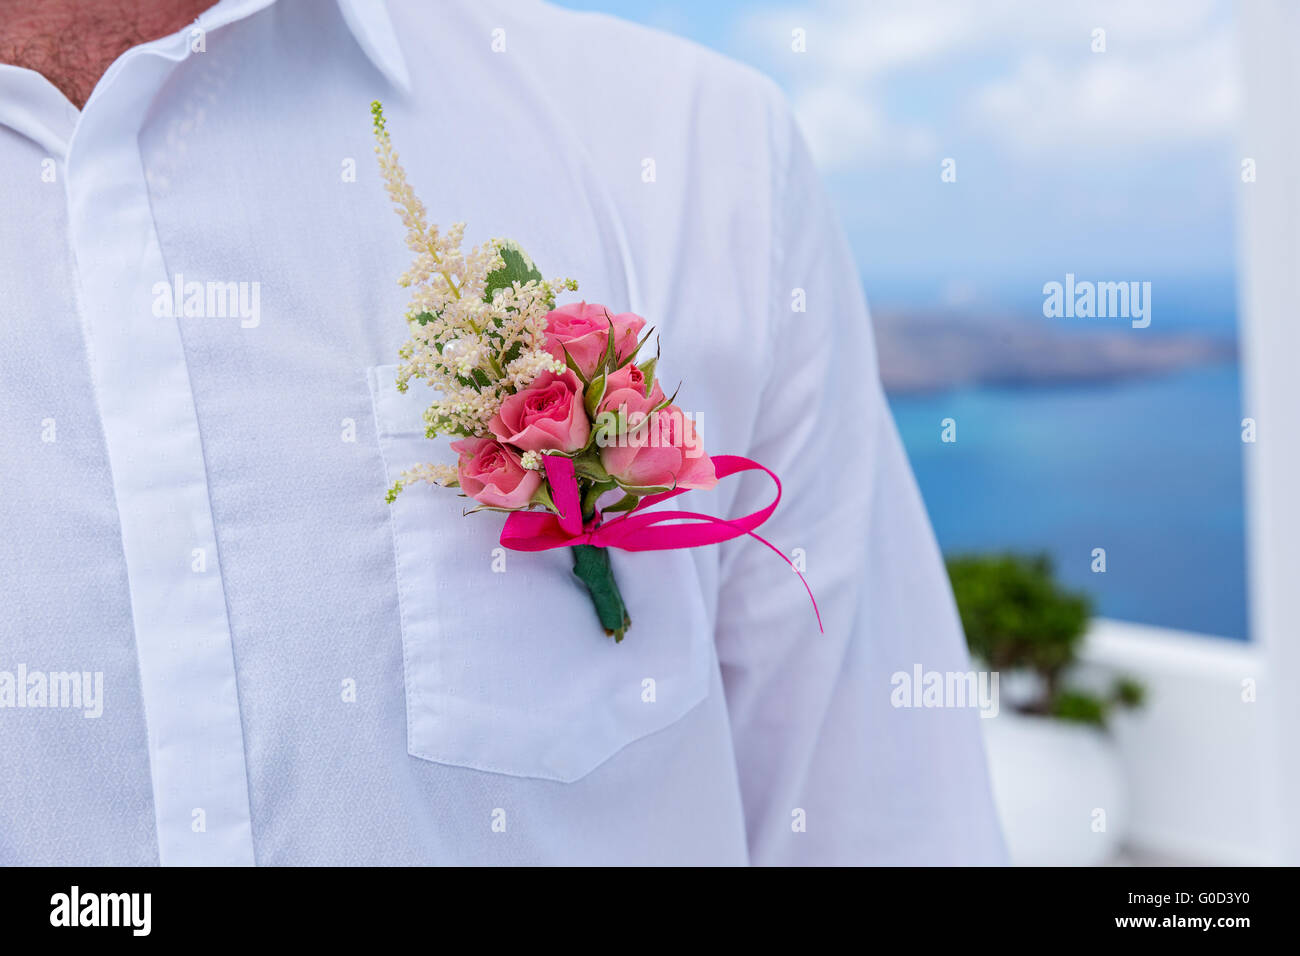 Boutonniere on white shirt of the groom Stock Photo